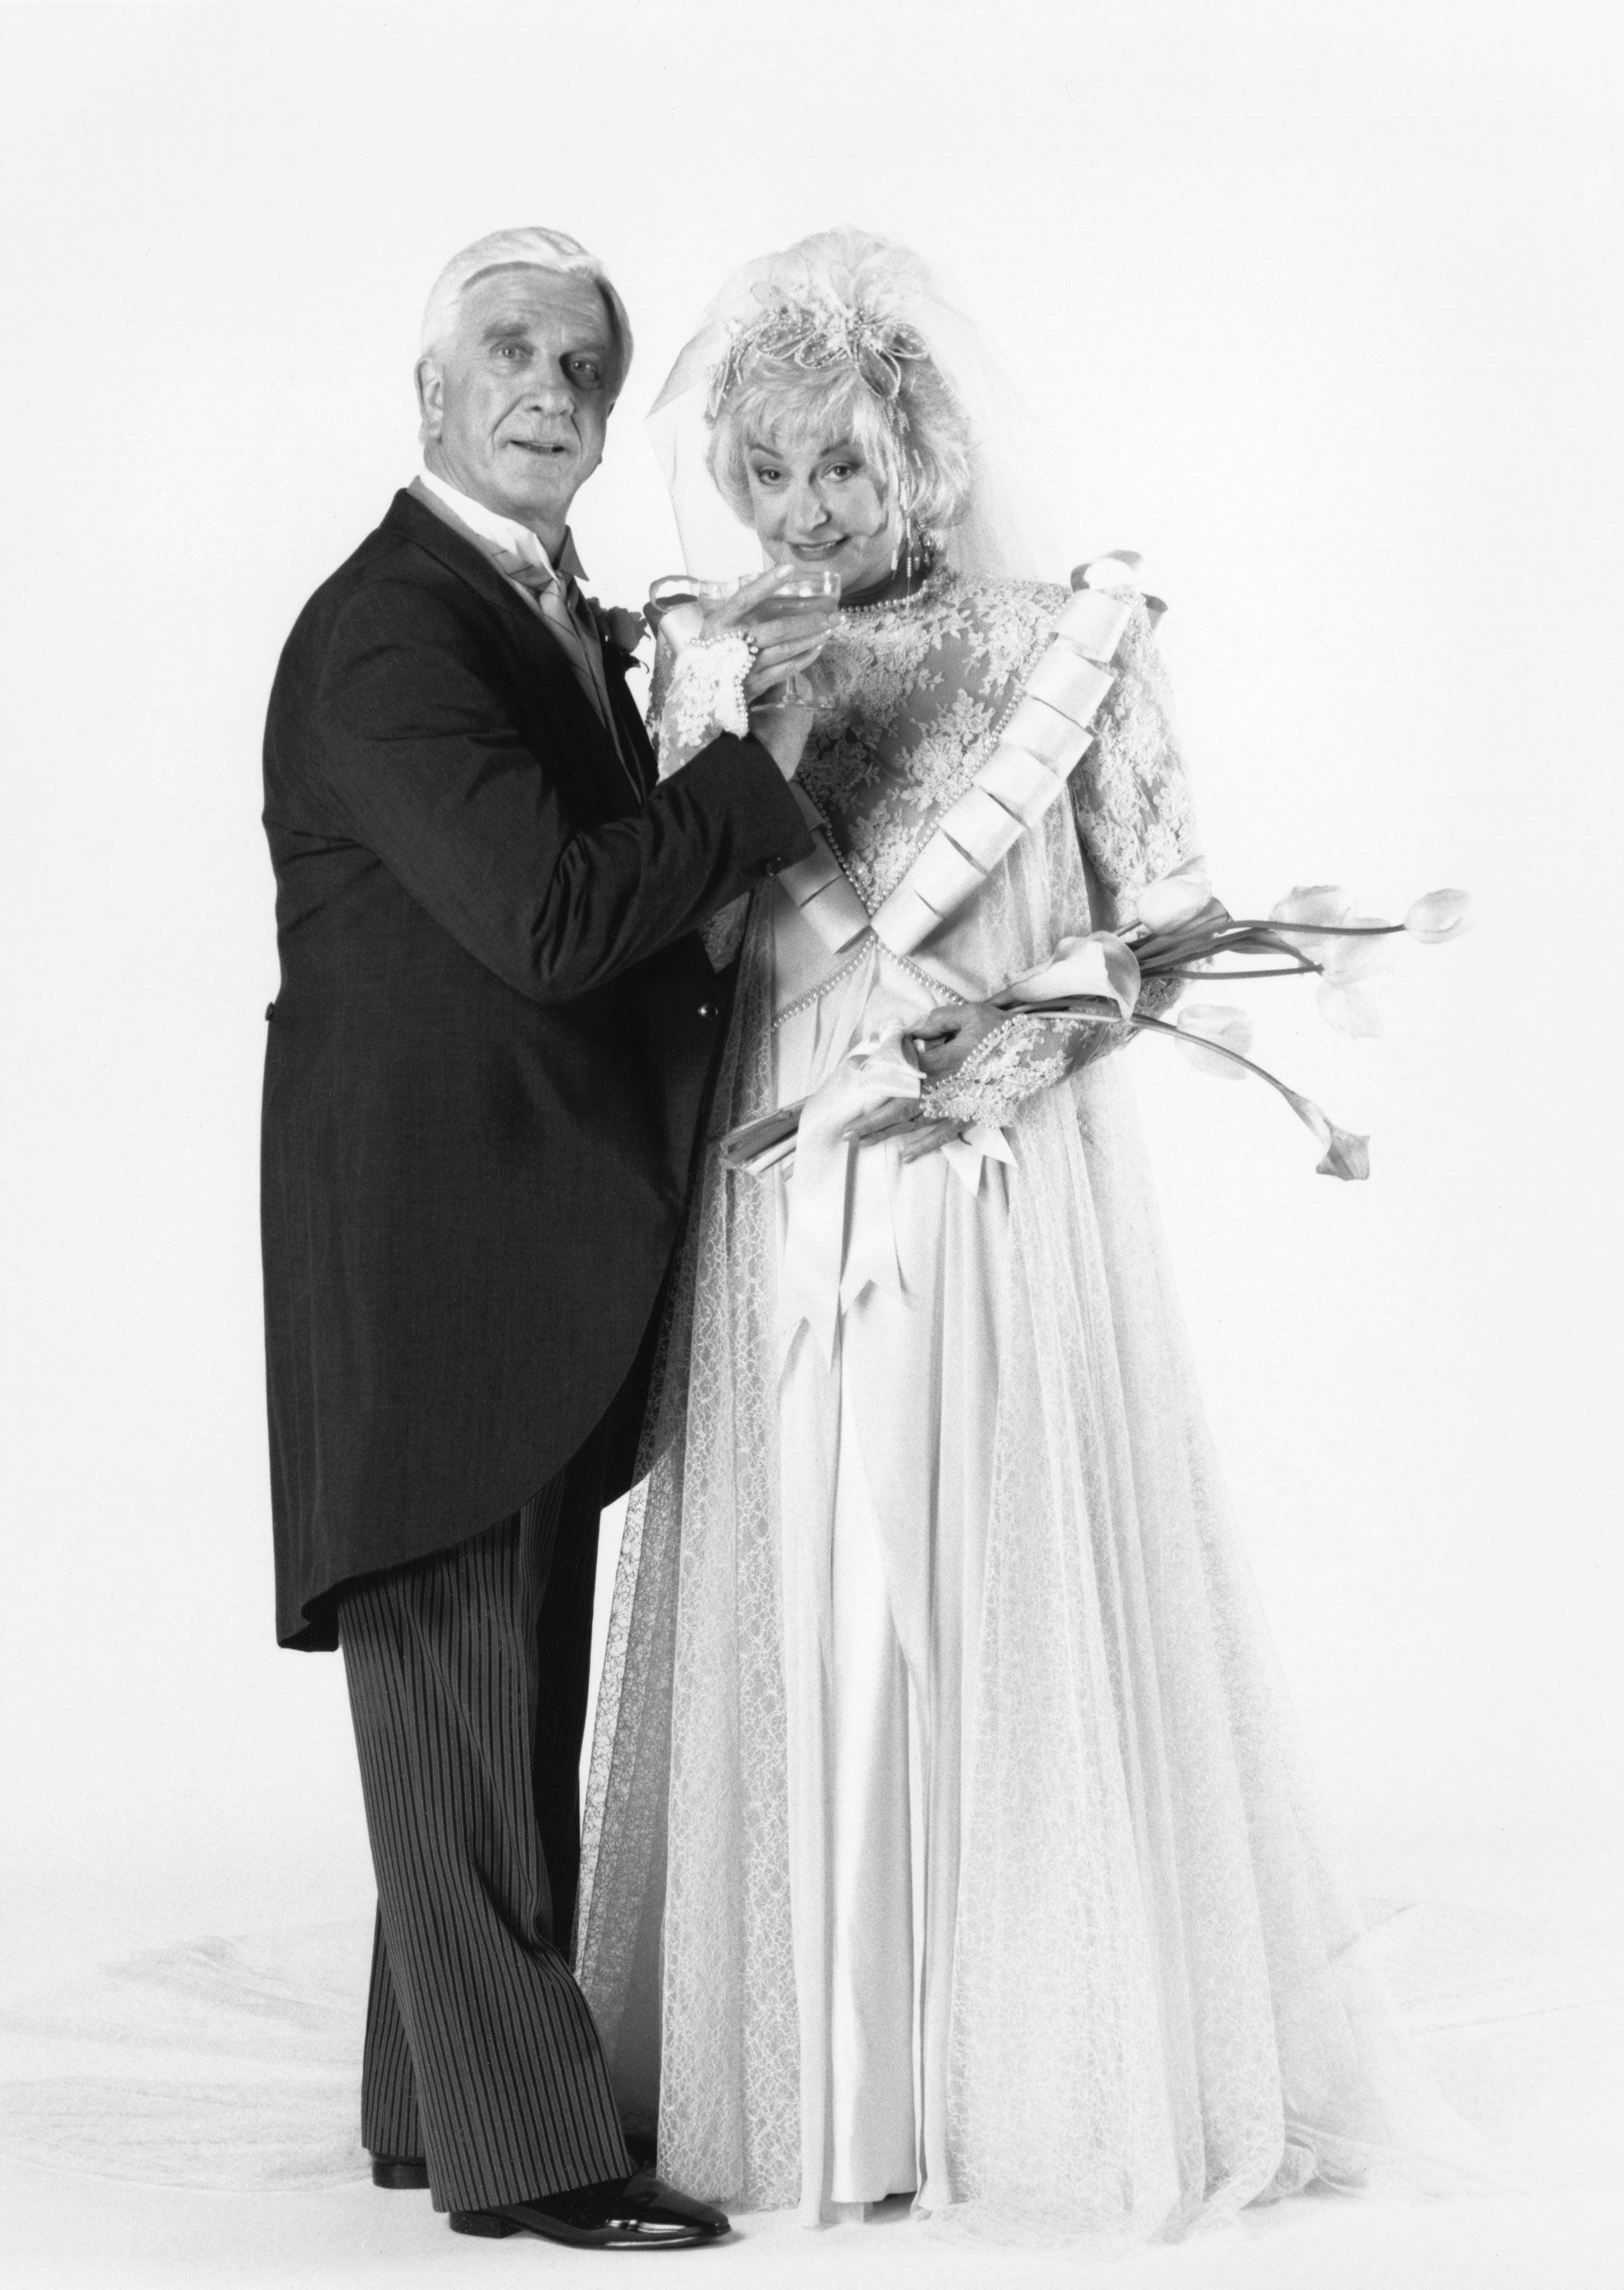 Leslie Nielson as Lucas Hollingsworth and Bea Arthur as Dorothy Zbornak pose for a wedding photo during the series finale of 'The Golden Girls'